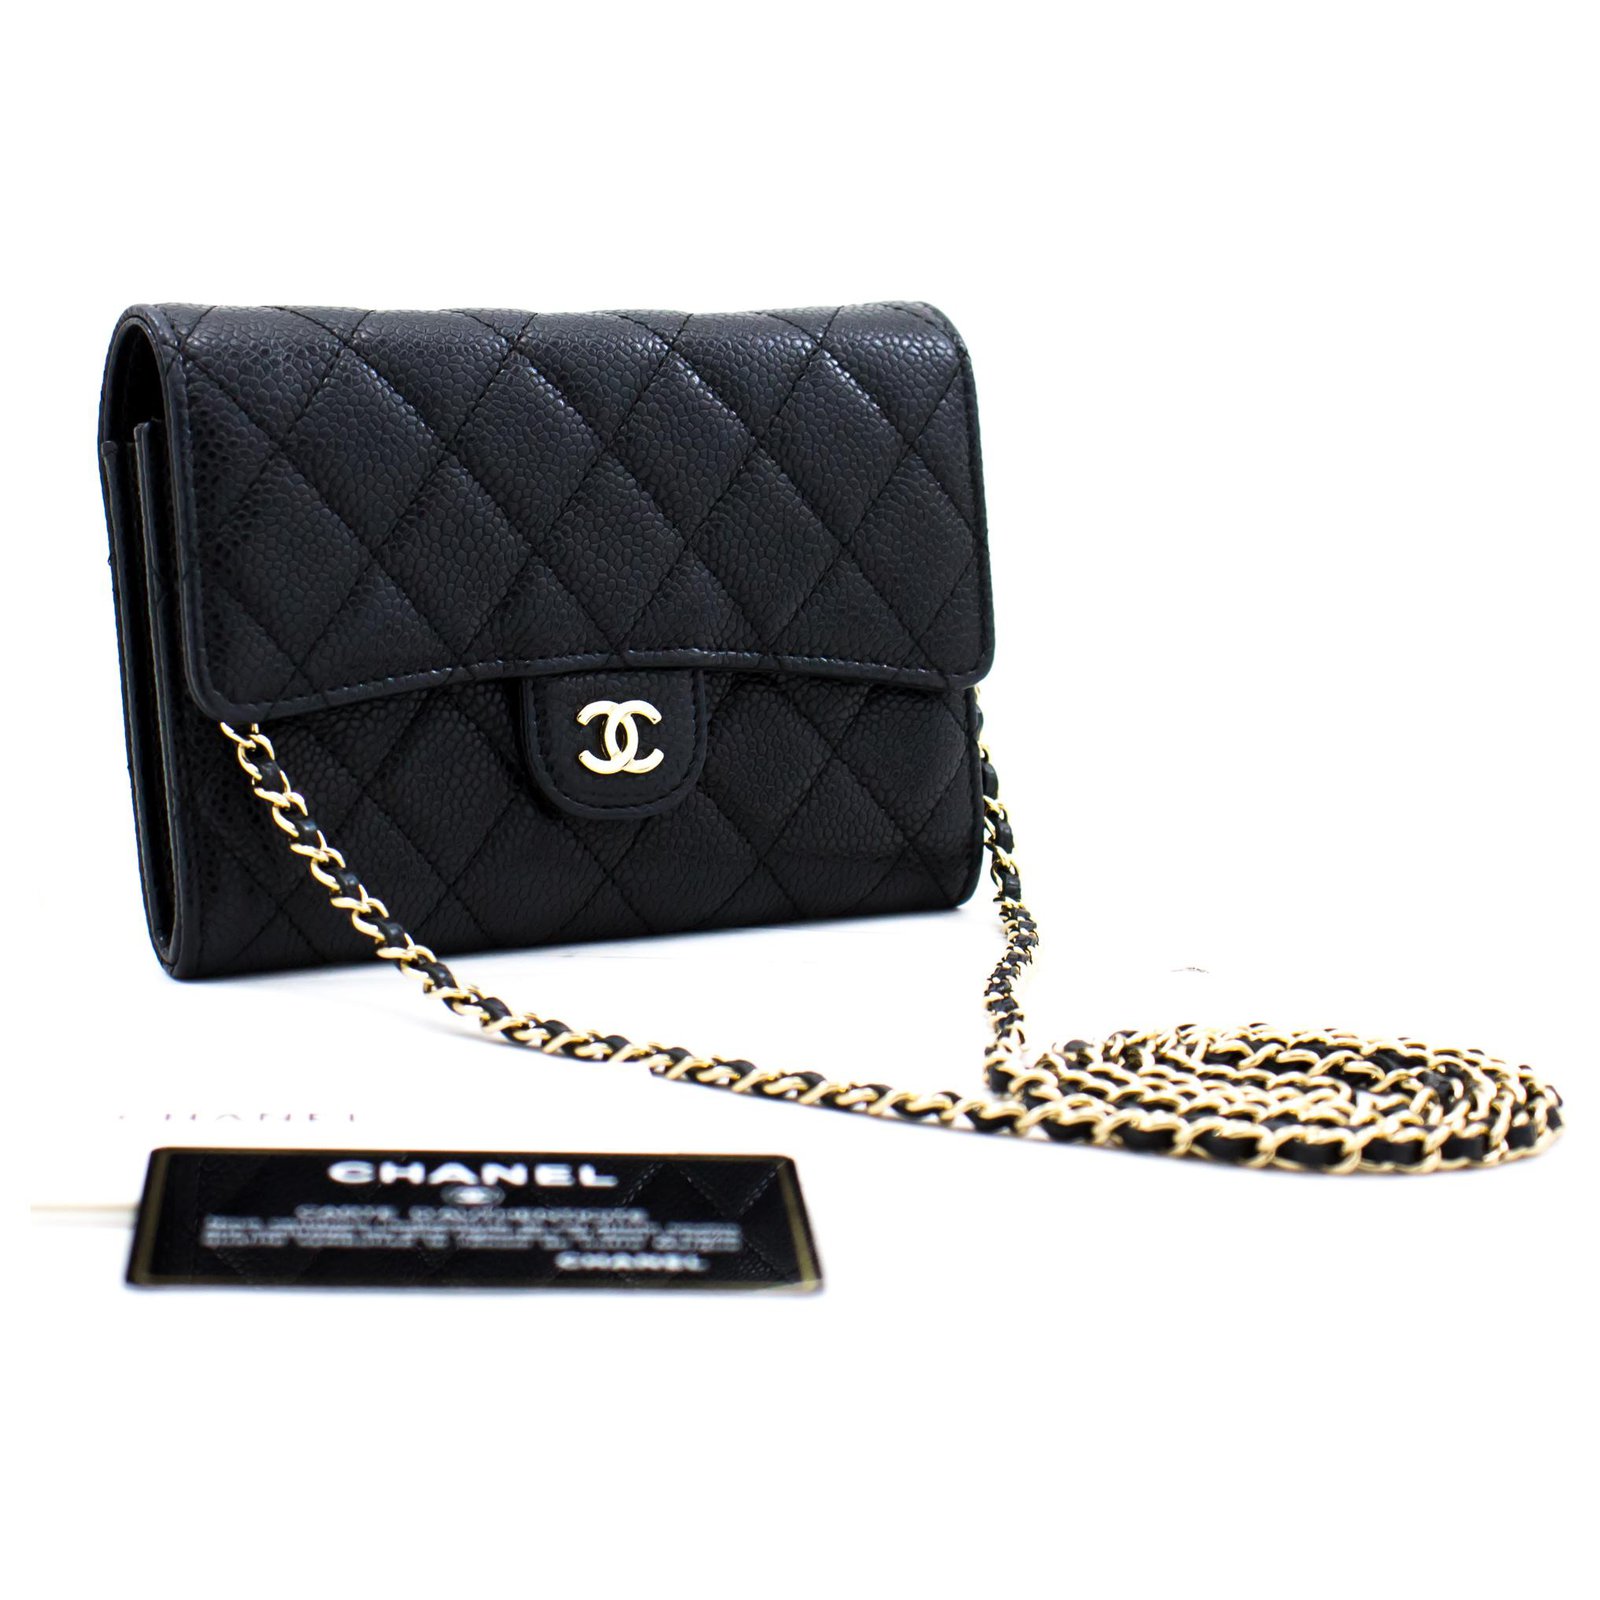 Chanel Wallet on Chain WOC Review, Mod Shots, What Fits and 12